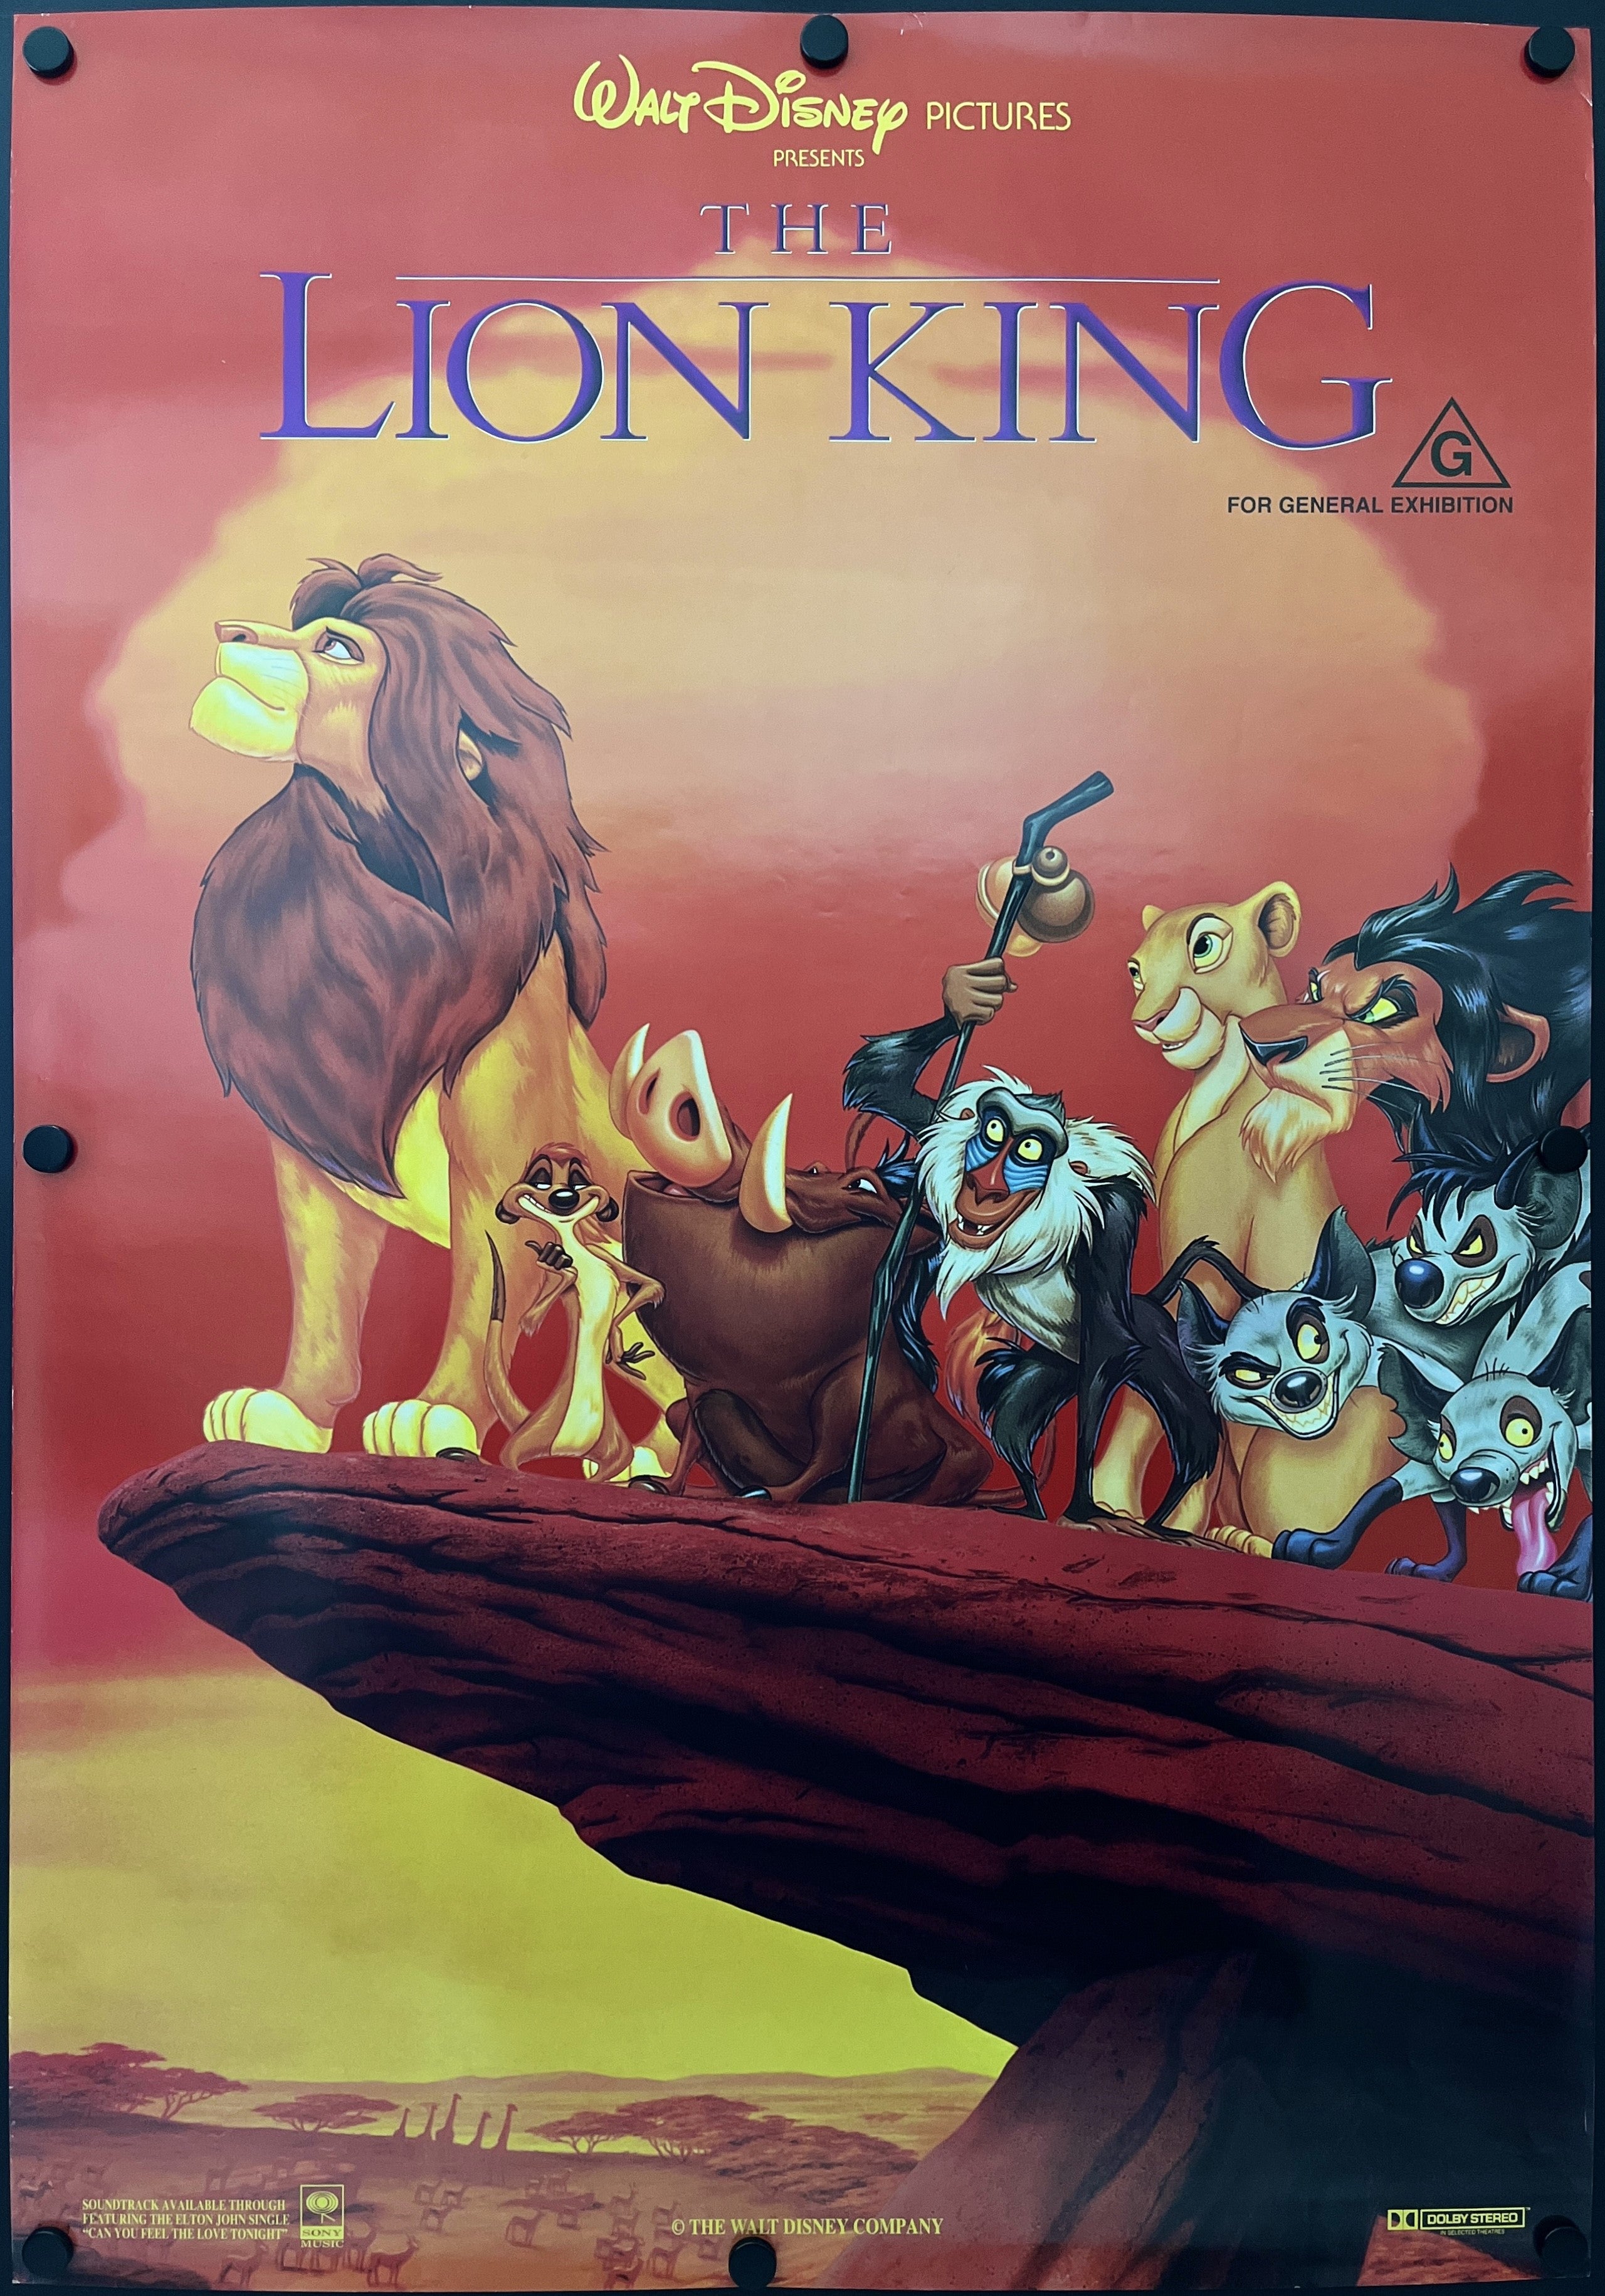 THE LION KING (1994)